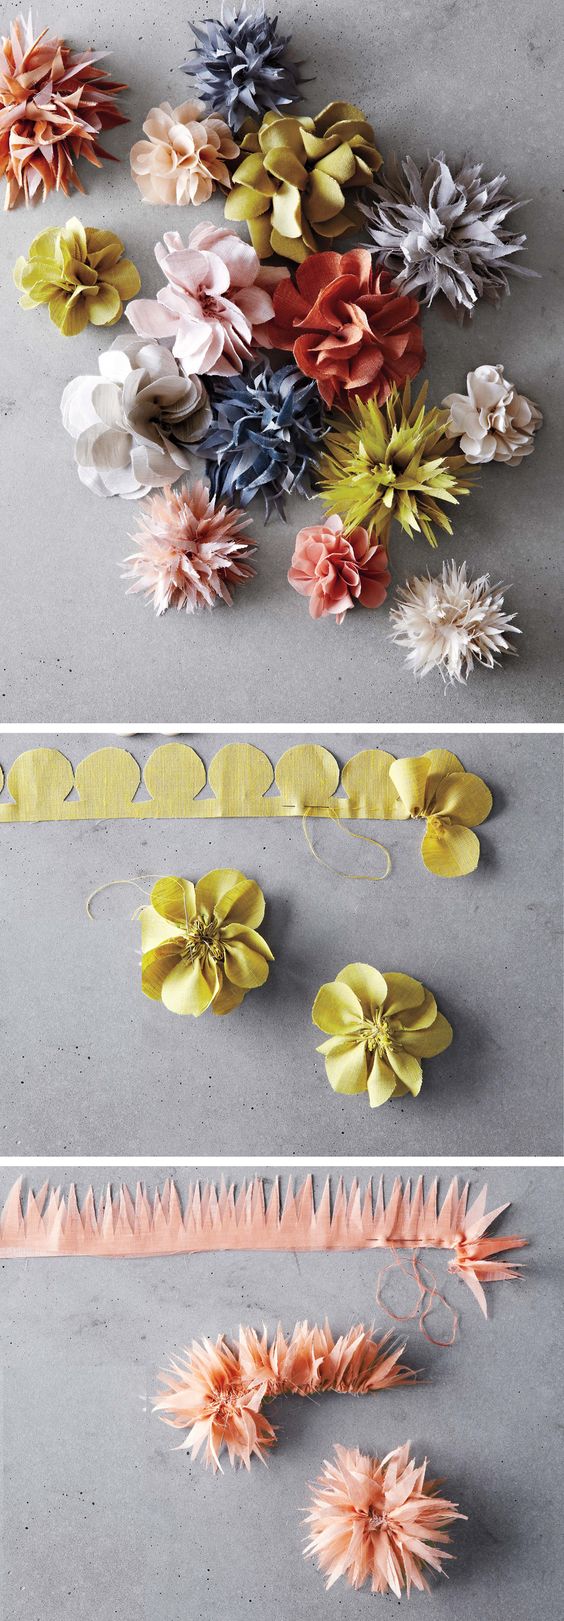 DIY Fabric Flowers - how gorgeous!: 